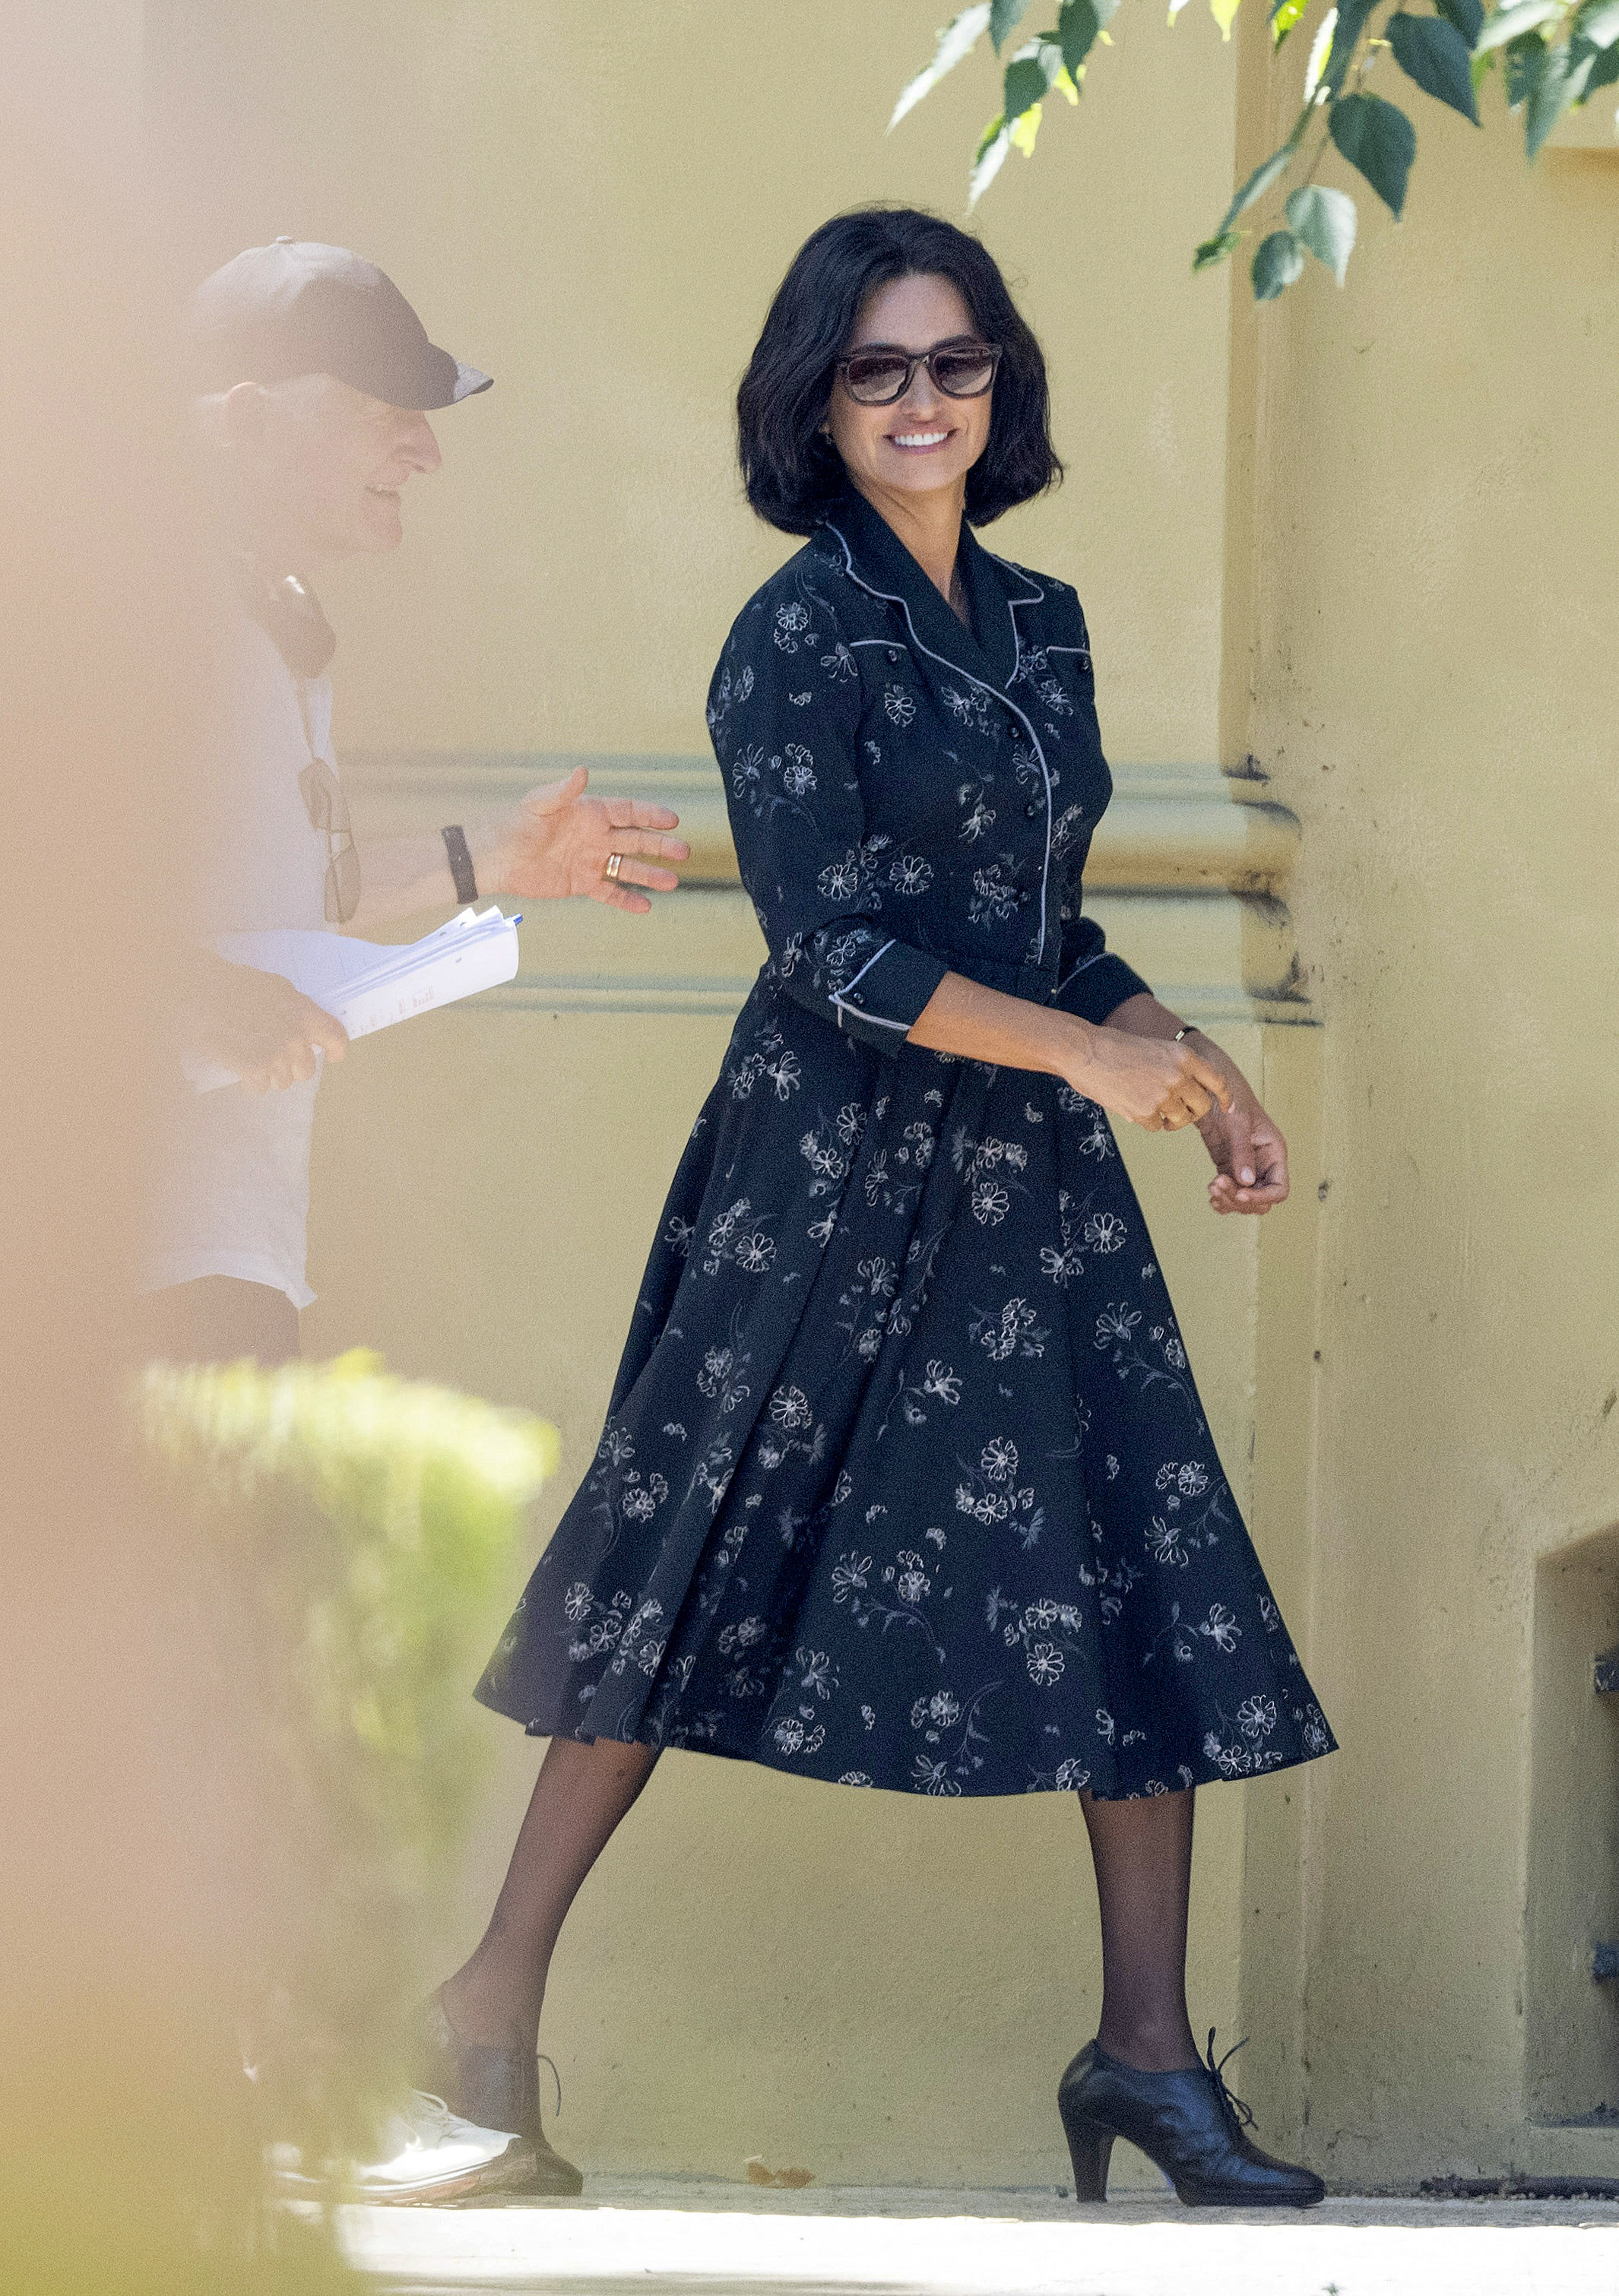 Brunette and with short hair, Penélope Cruz is filming in Modena the biography of Enzo Ferrari, directed by Michael Mann